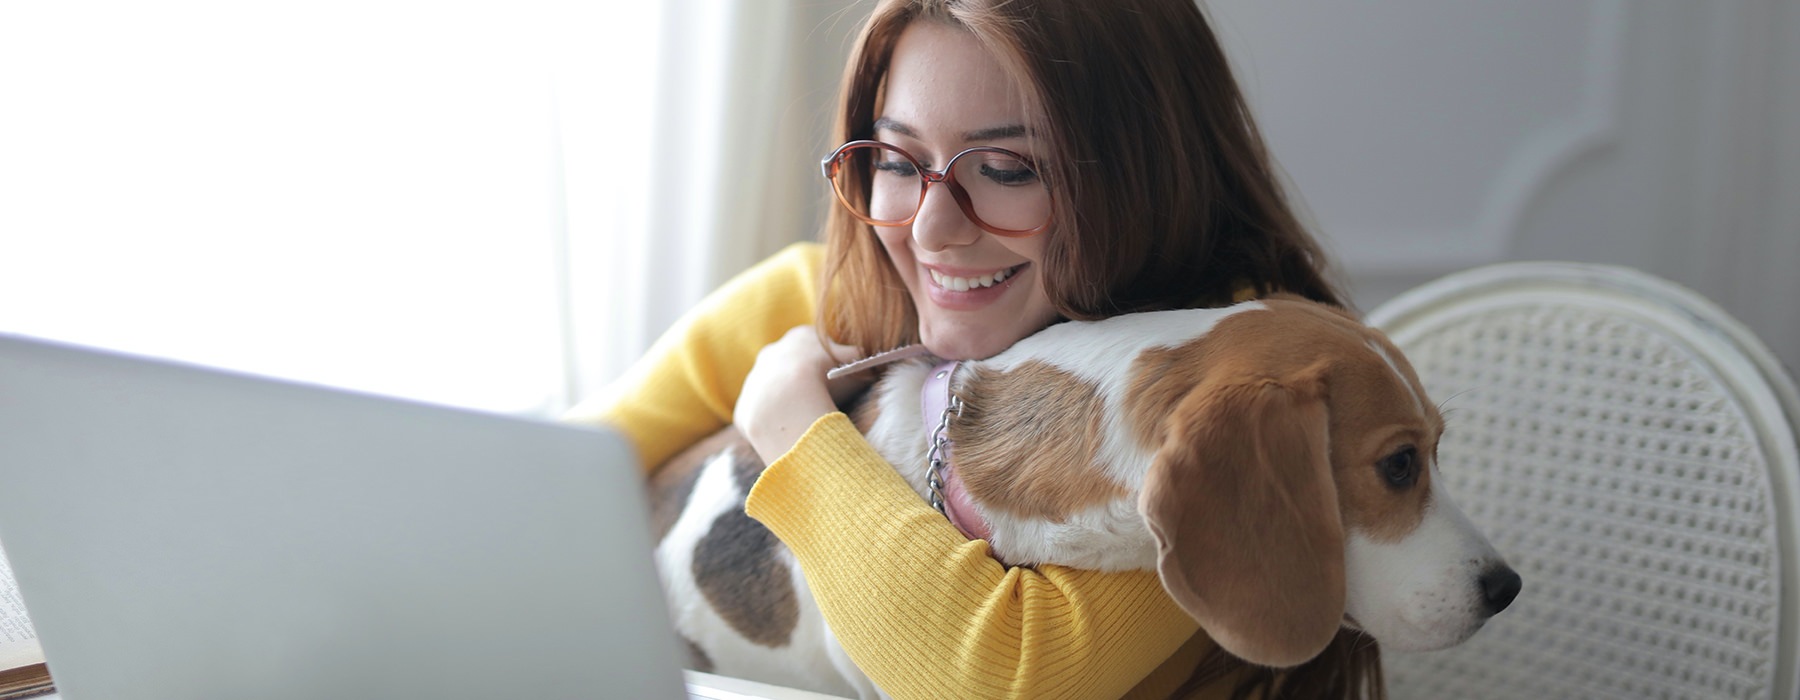 Woman looking at her computer and holding a dog